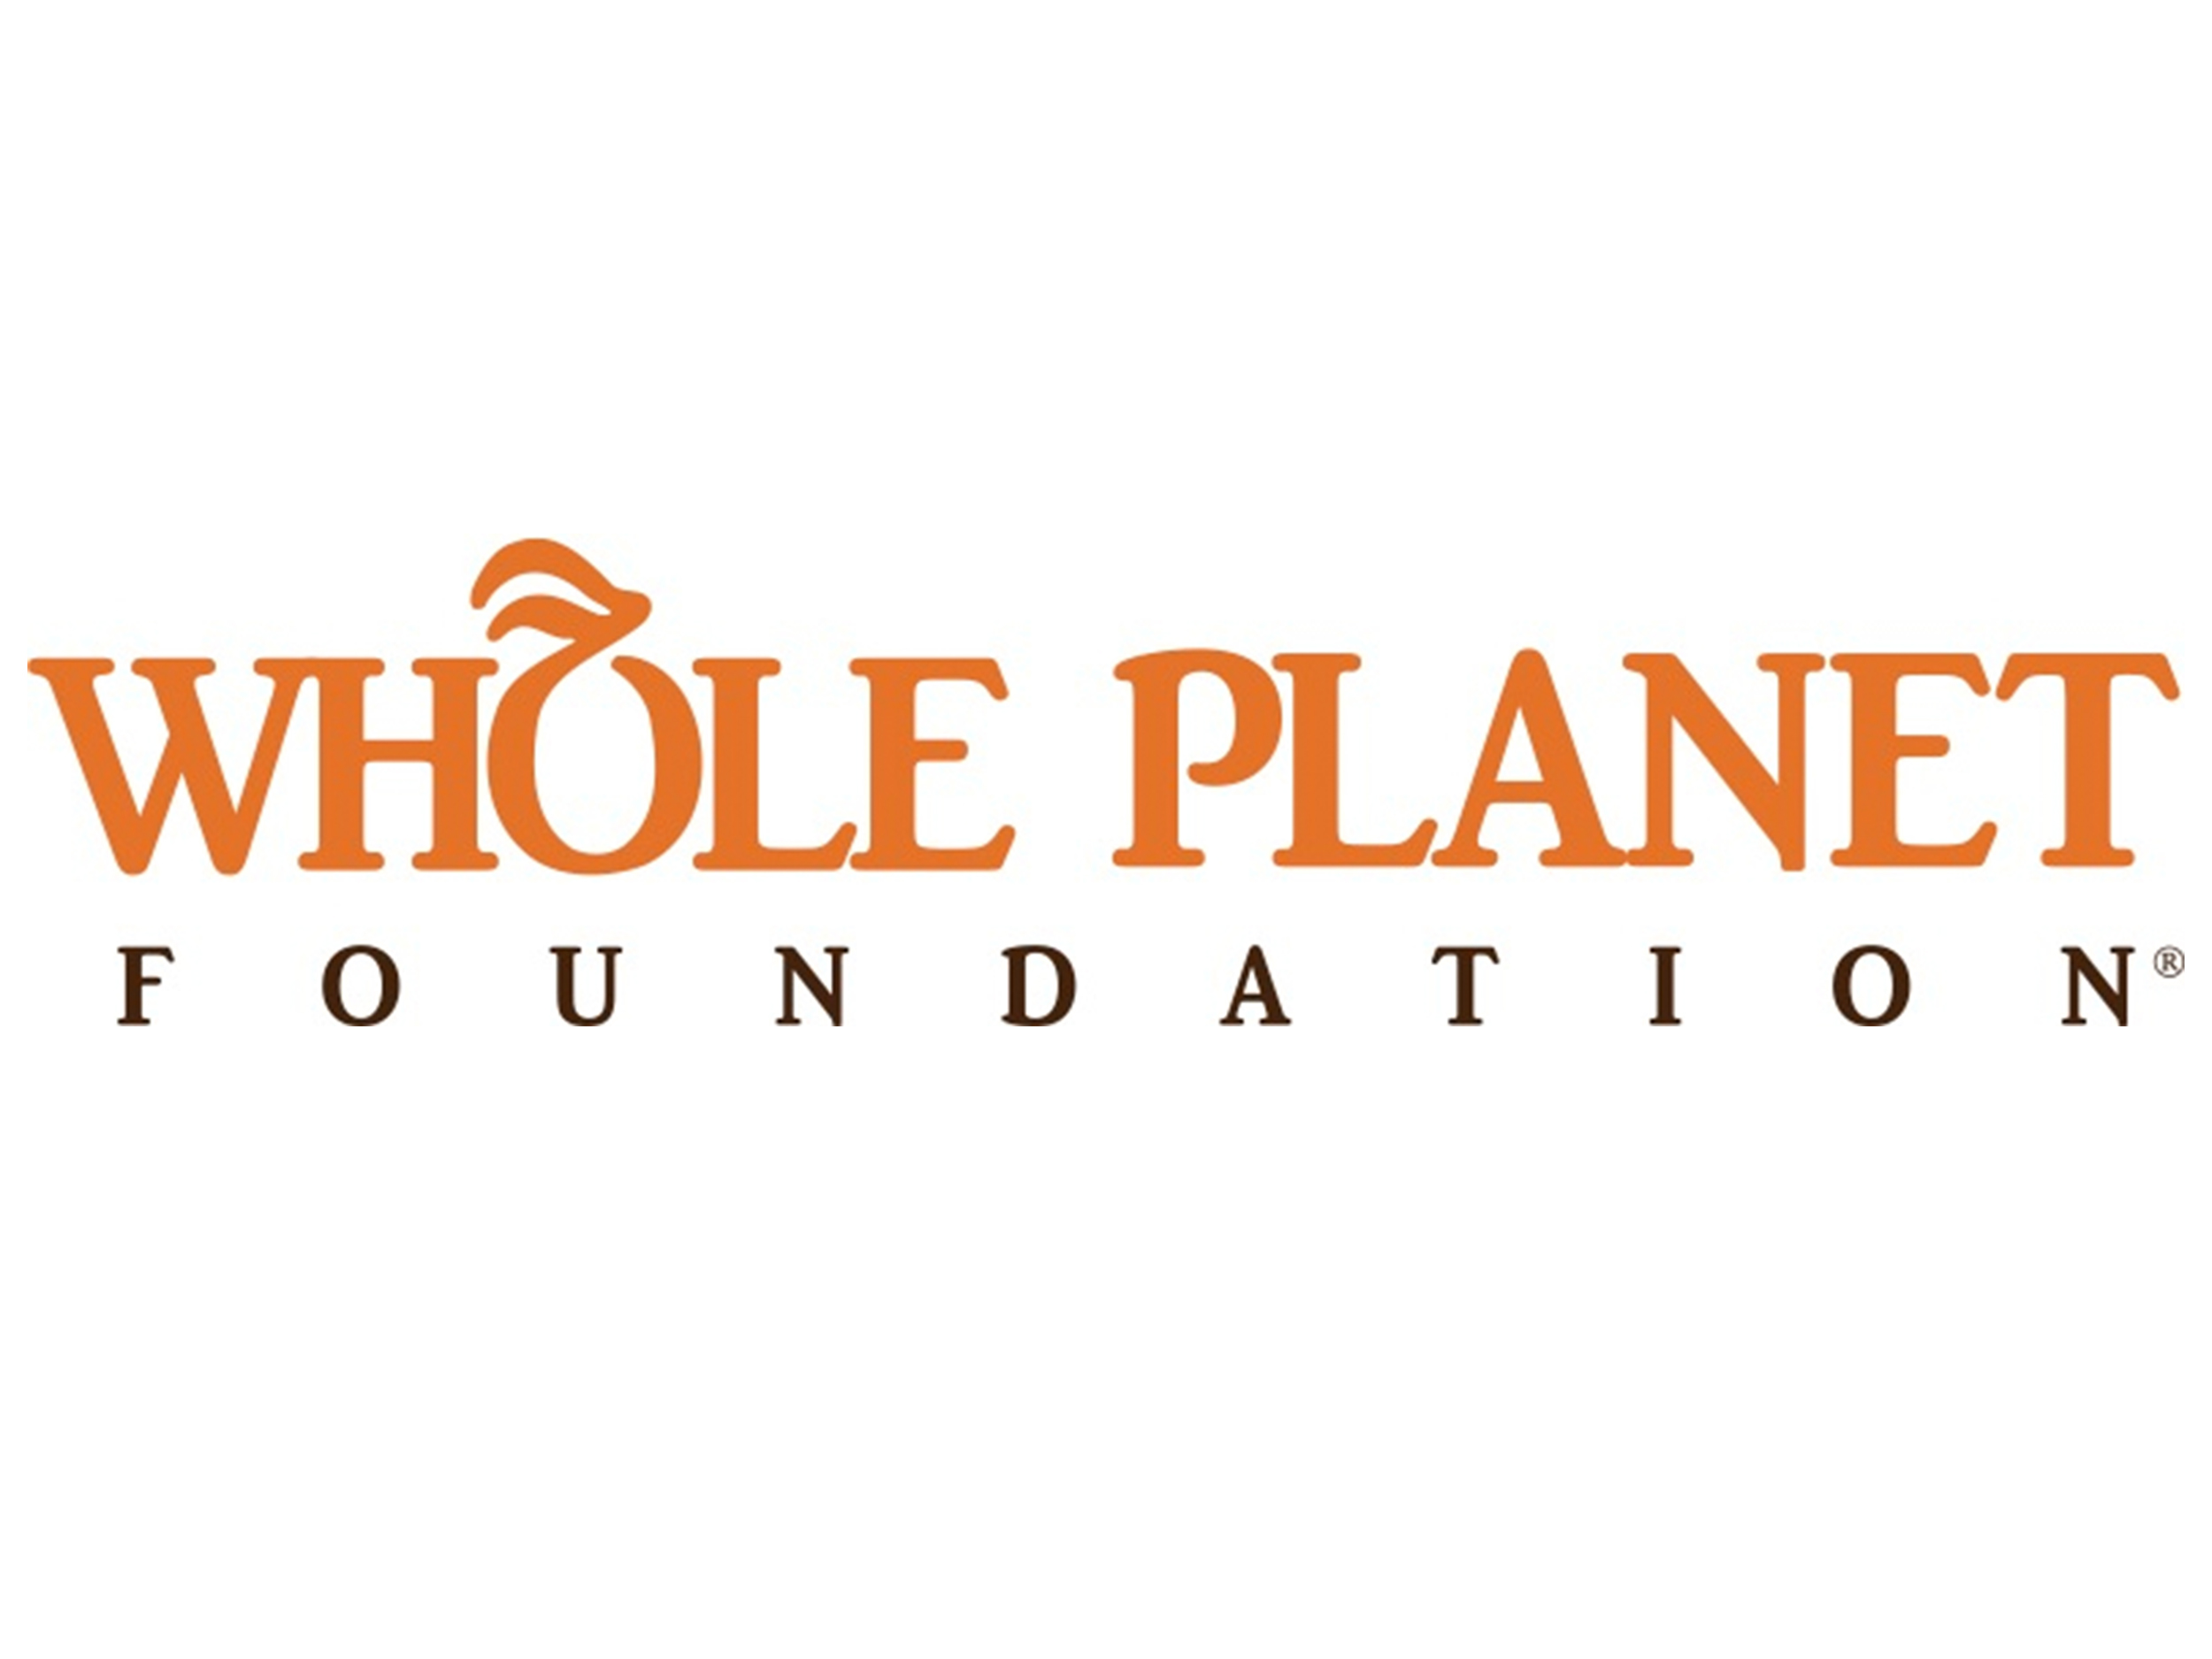 The Whole Planet foundation